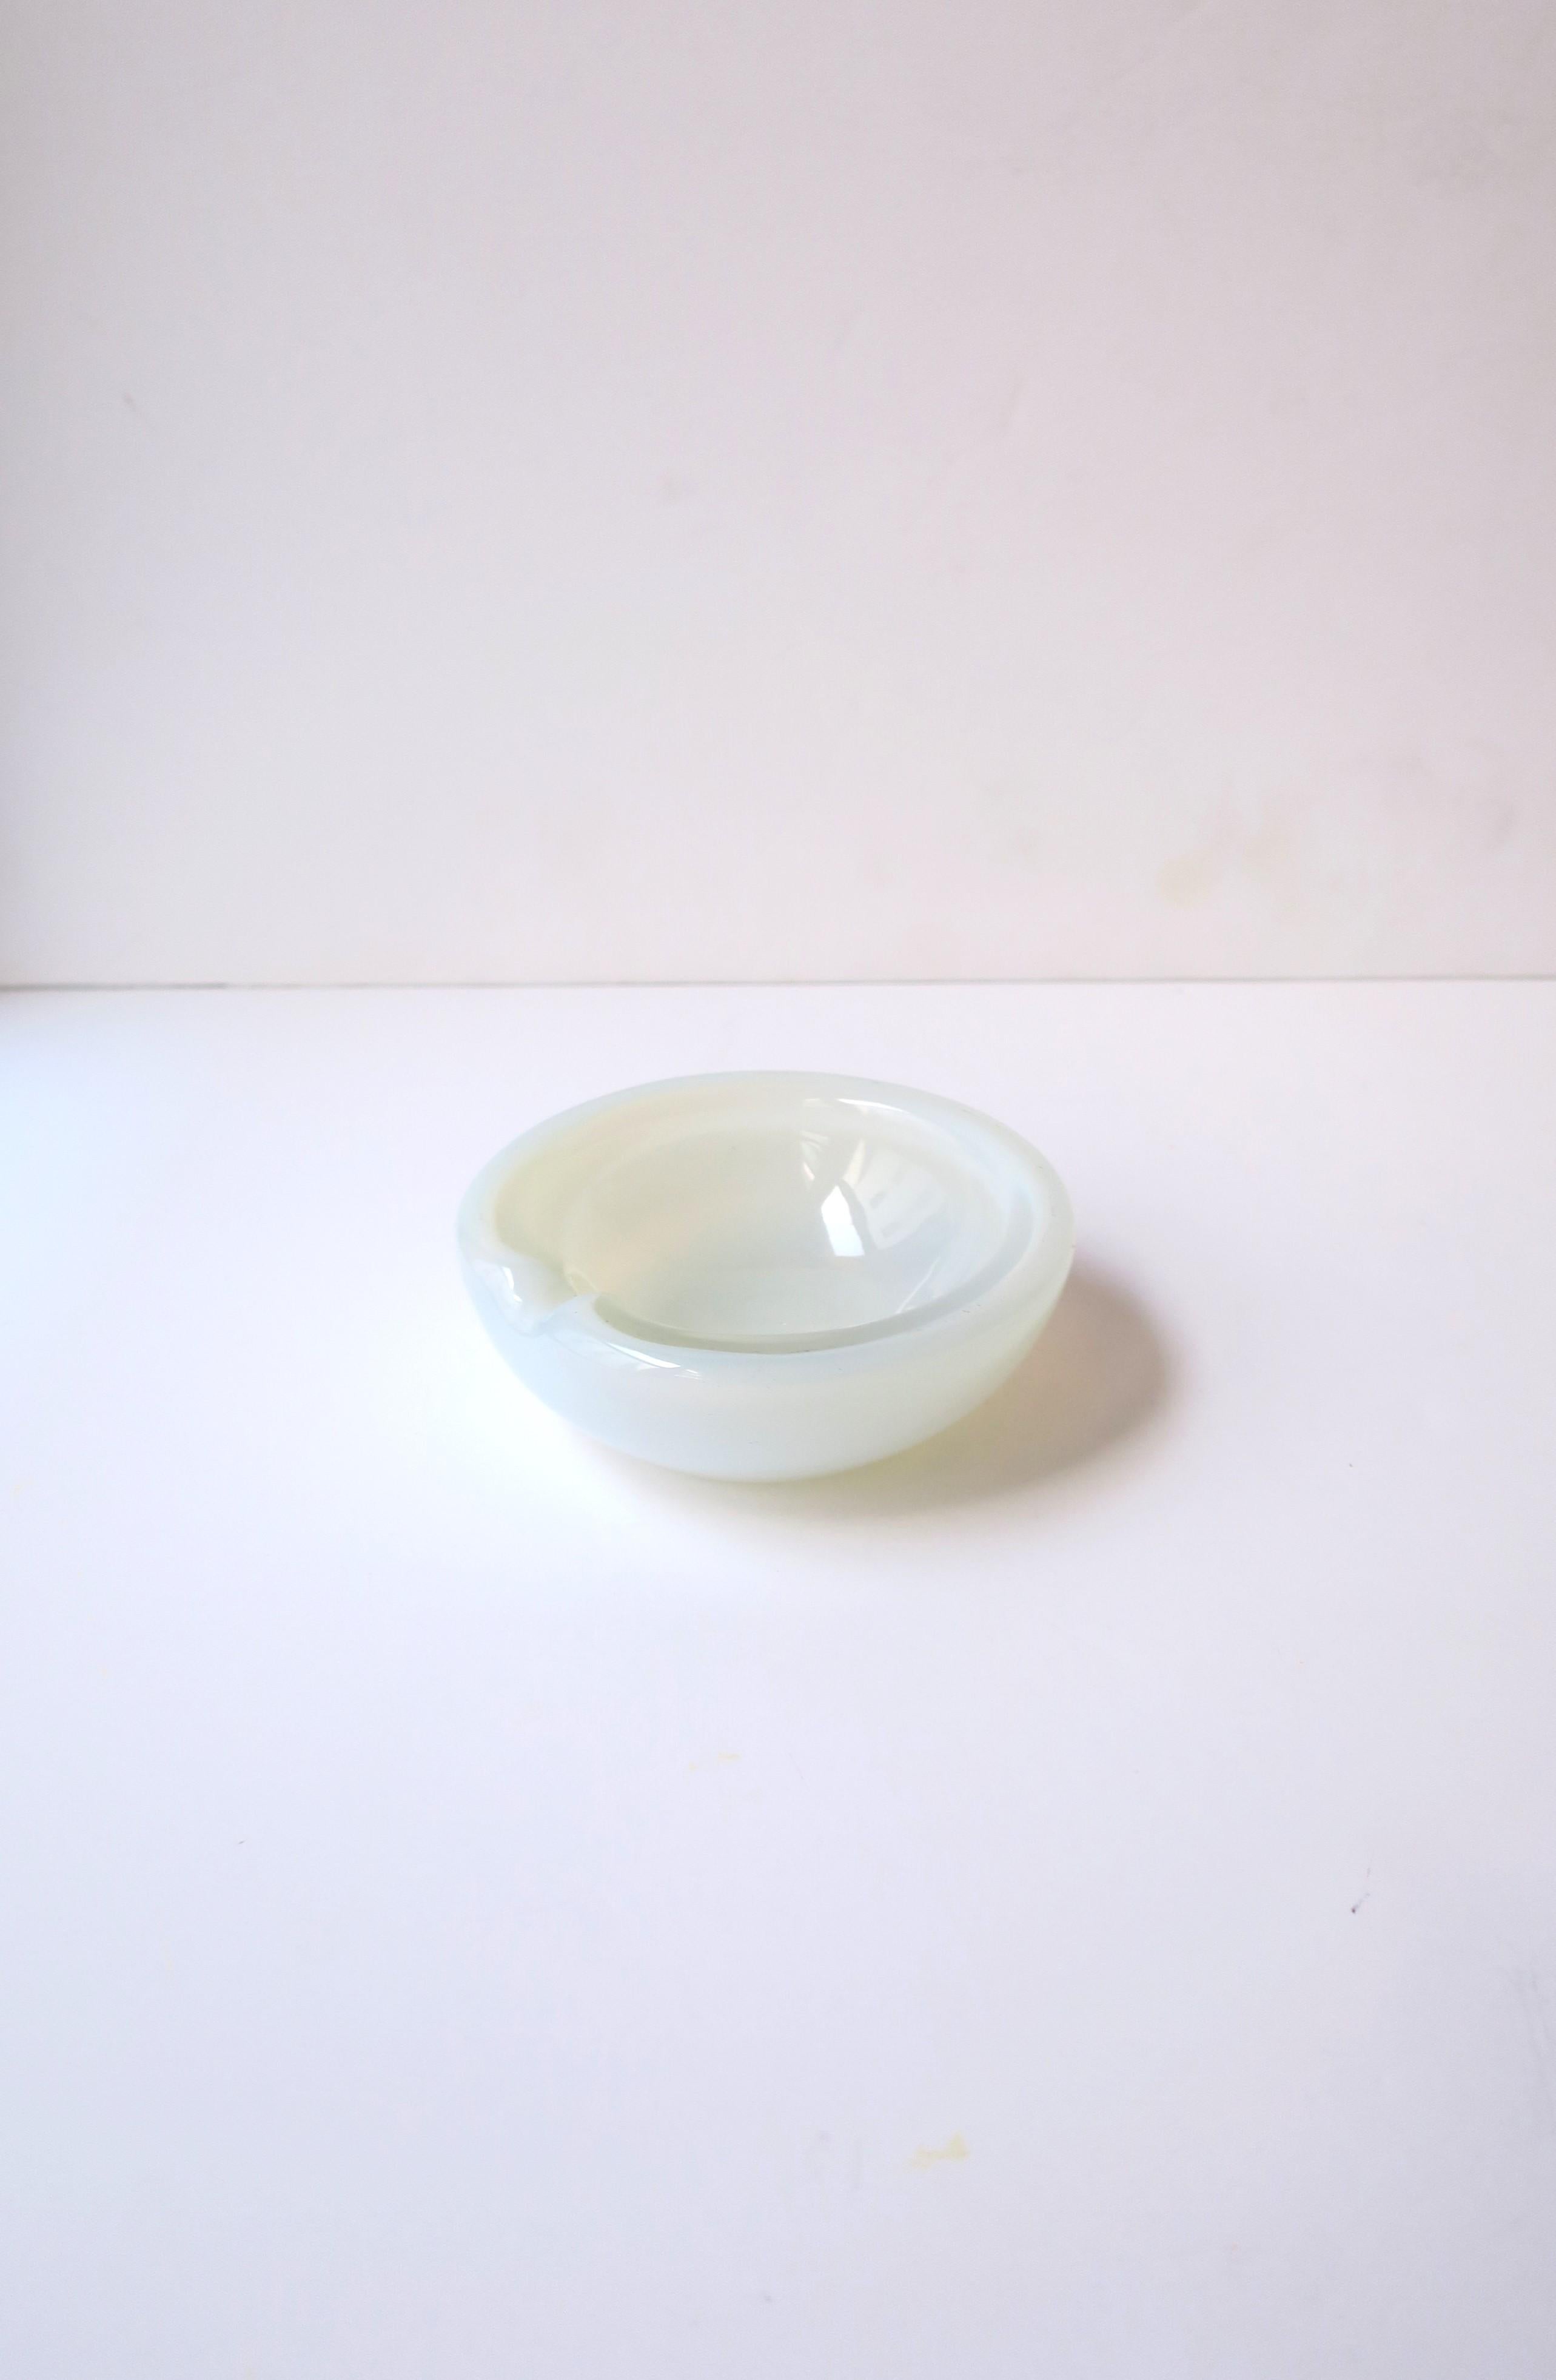 An Italian Murano white opaline art glass ashtray or bowl, Midcentury Modern period, in the style of designer Angelo Seguso, circa mid-20th century, Italy. A beautiful small ashtray with one indent around edge. Piece also makes a great bowl or